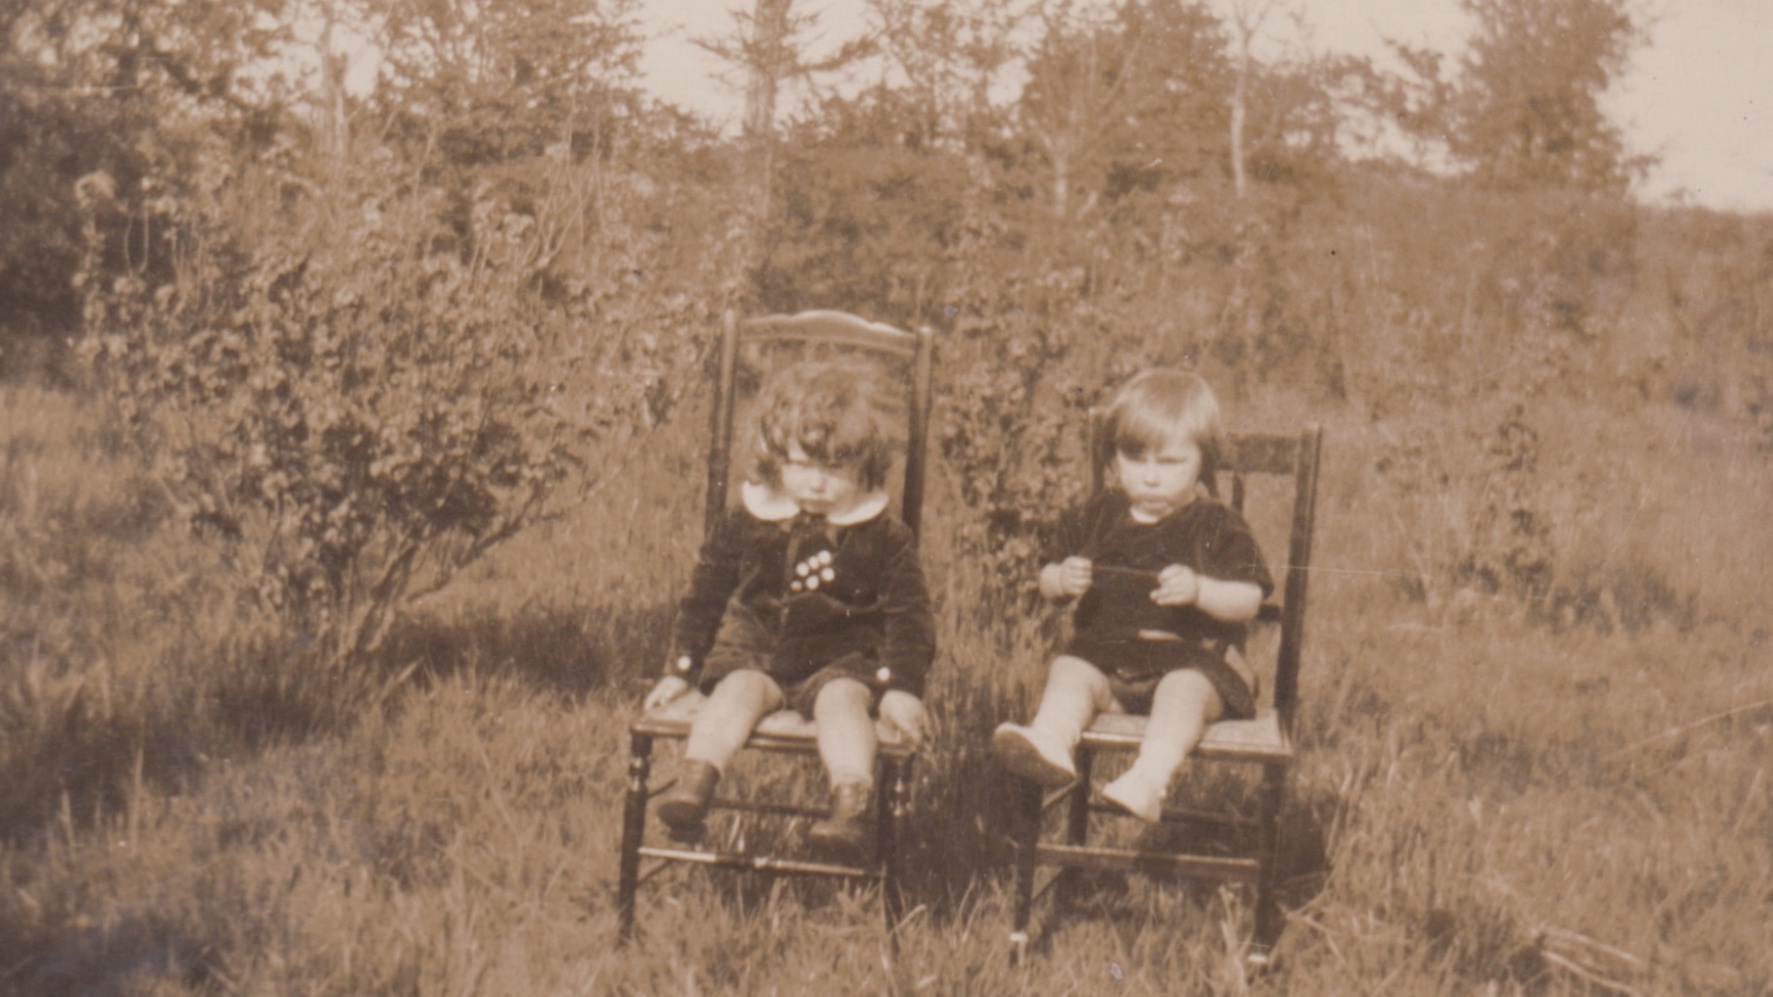 Two boys C. 1924 - 1925